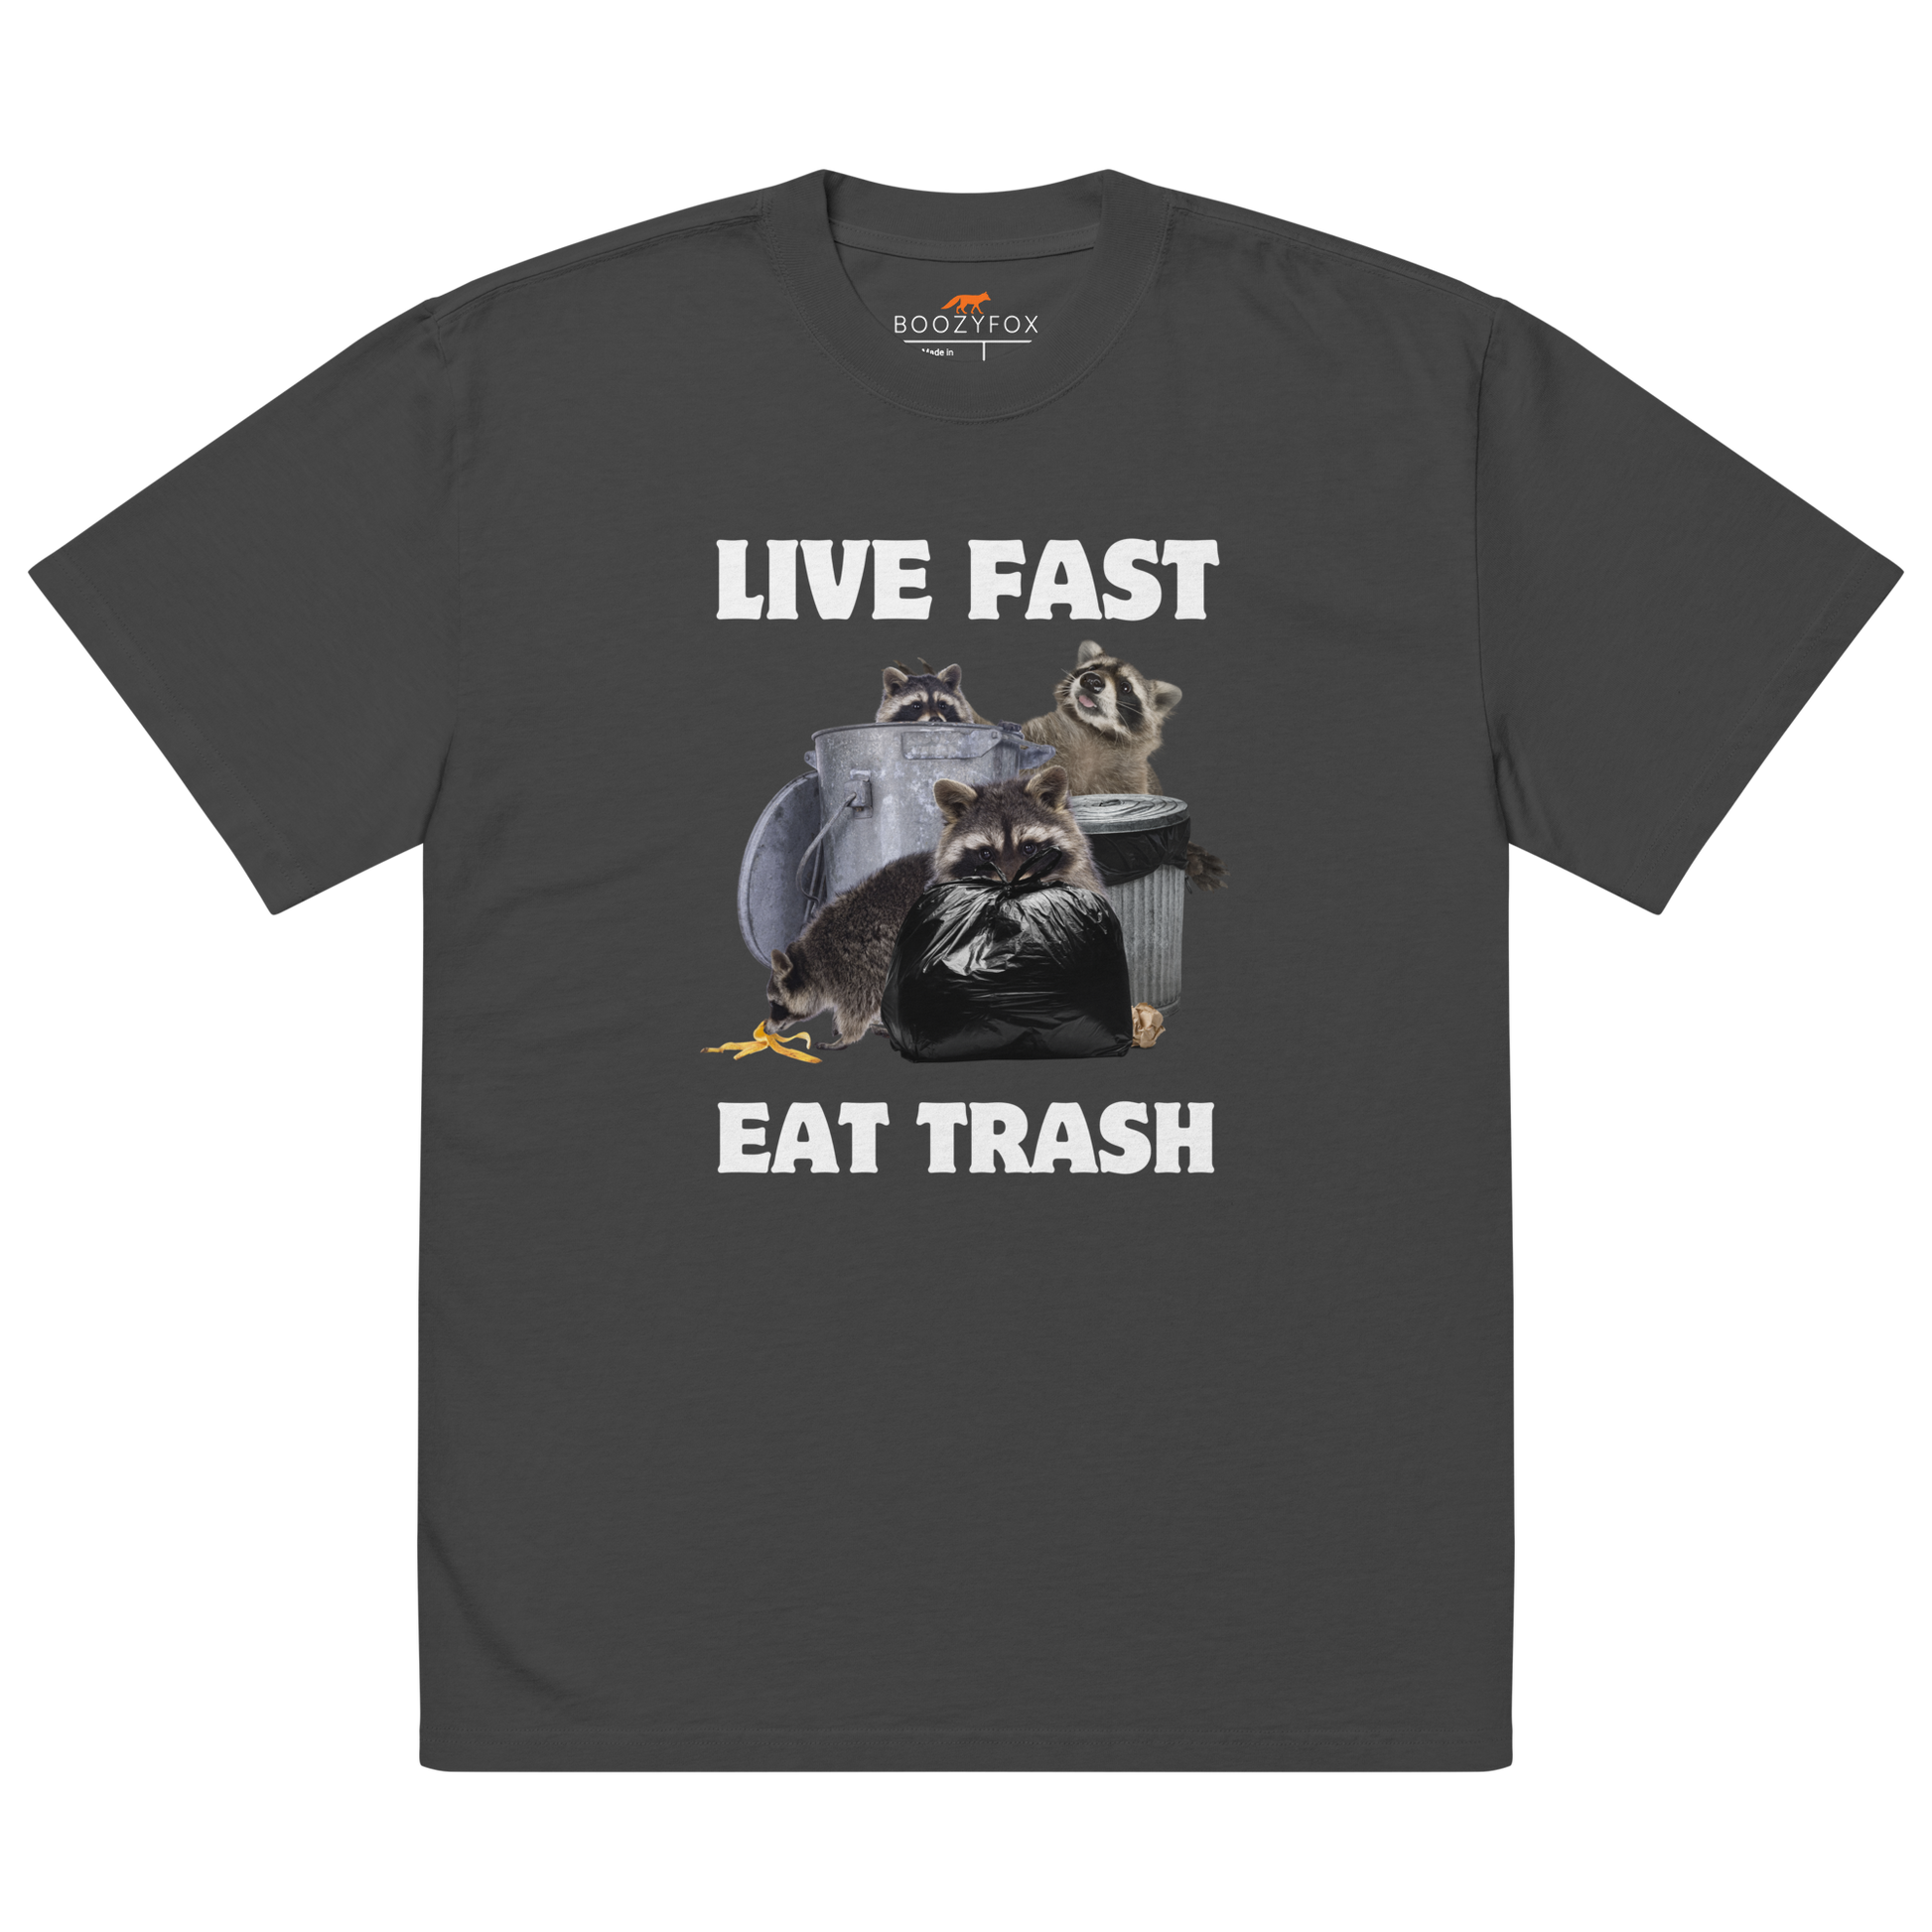 Faded Black Raccoon Oversized T-Shirt featuring the bold Live Fast Eat Trash graphic on the chest - Funny Graphic Raccoon Oversized Tees - Boozy Fox